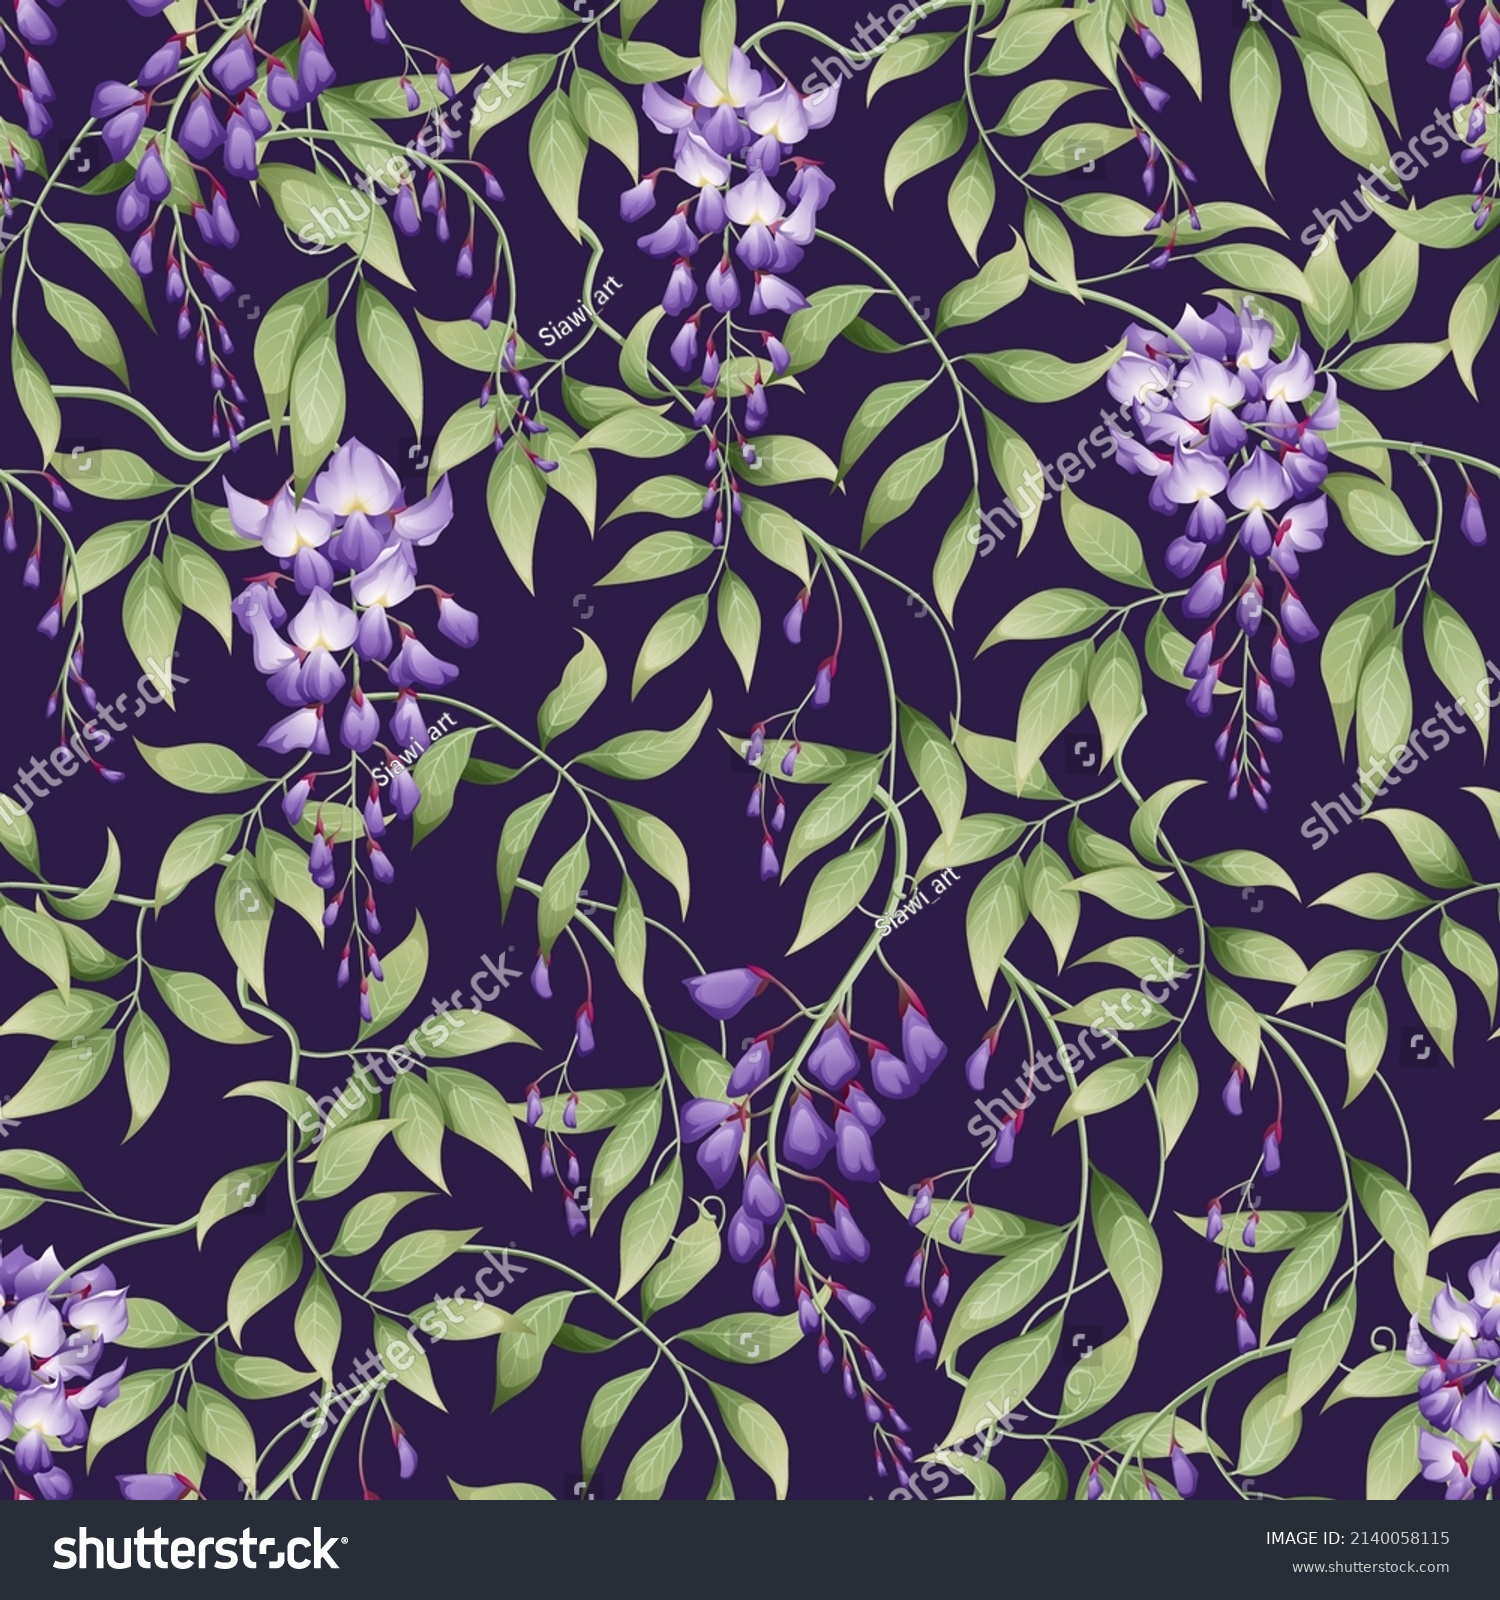 SVG of Seamless pattern with purple wisteria and green leaves on a dark background. Great for textile, fabric, wrapping paper, wallpaper. svg